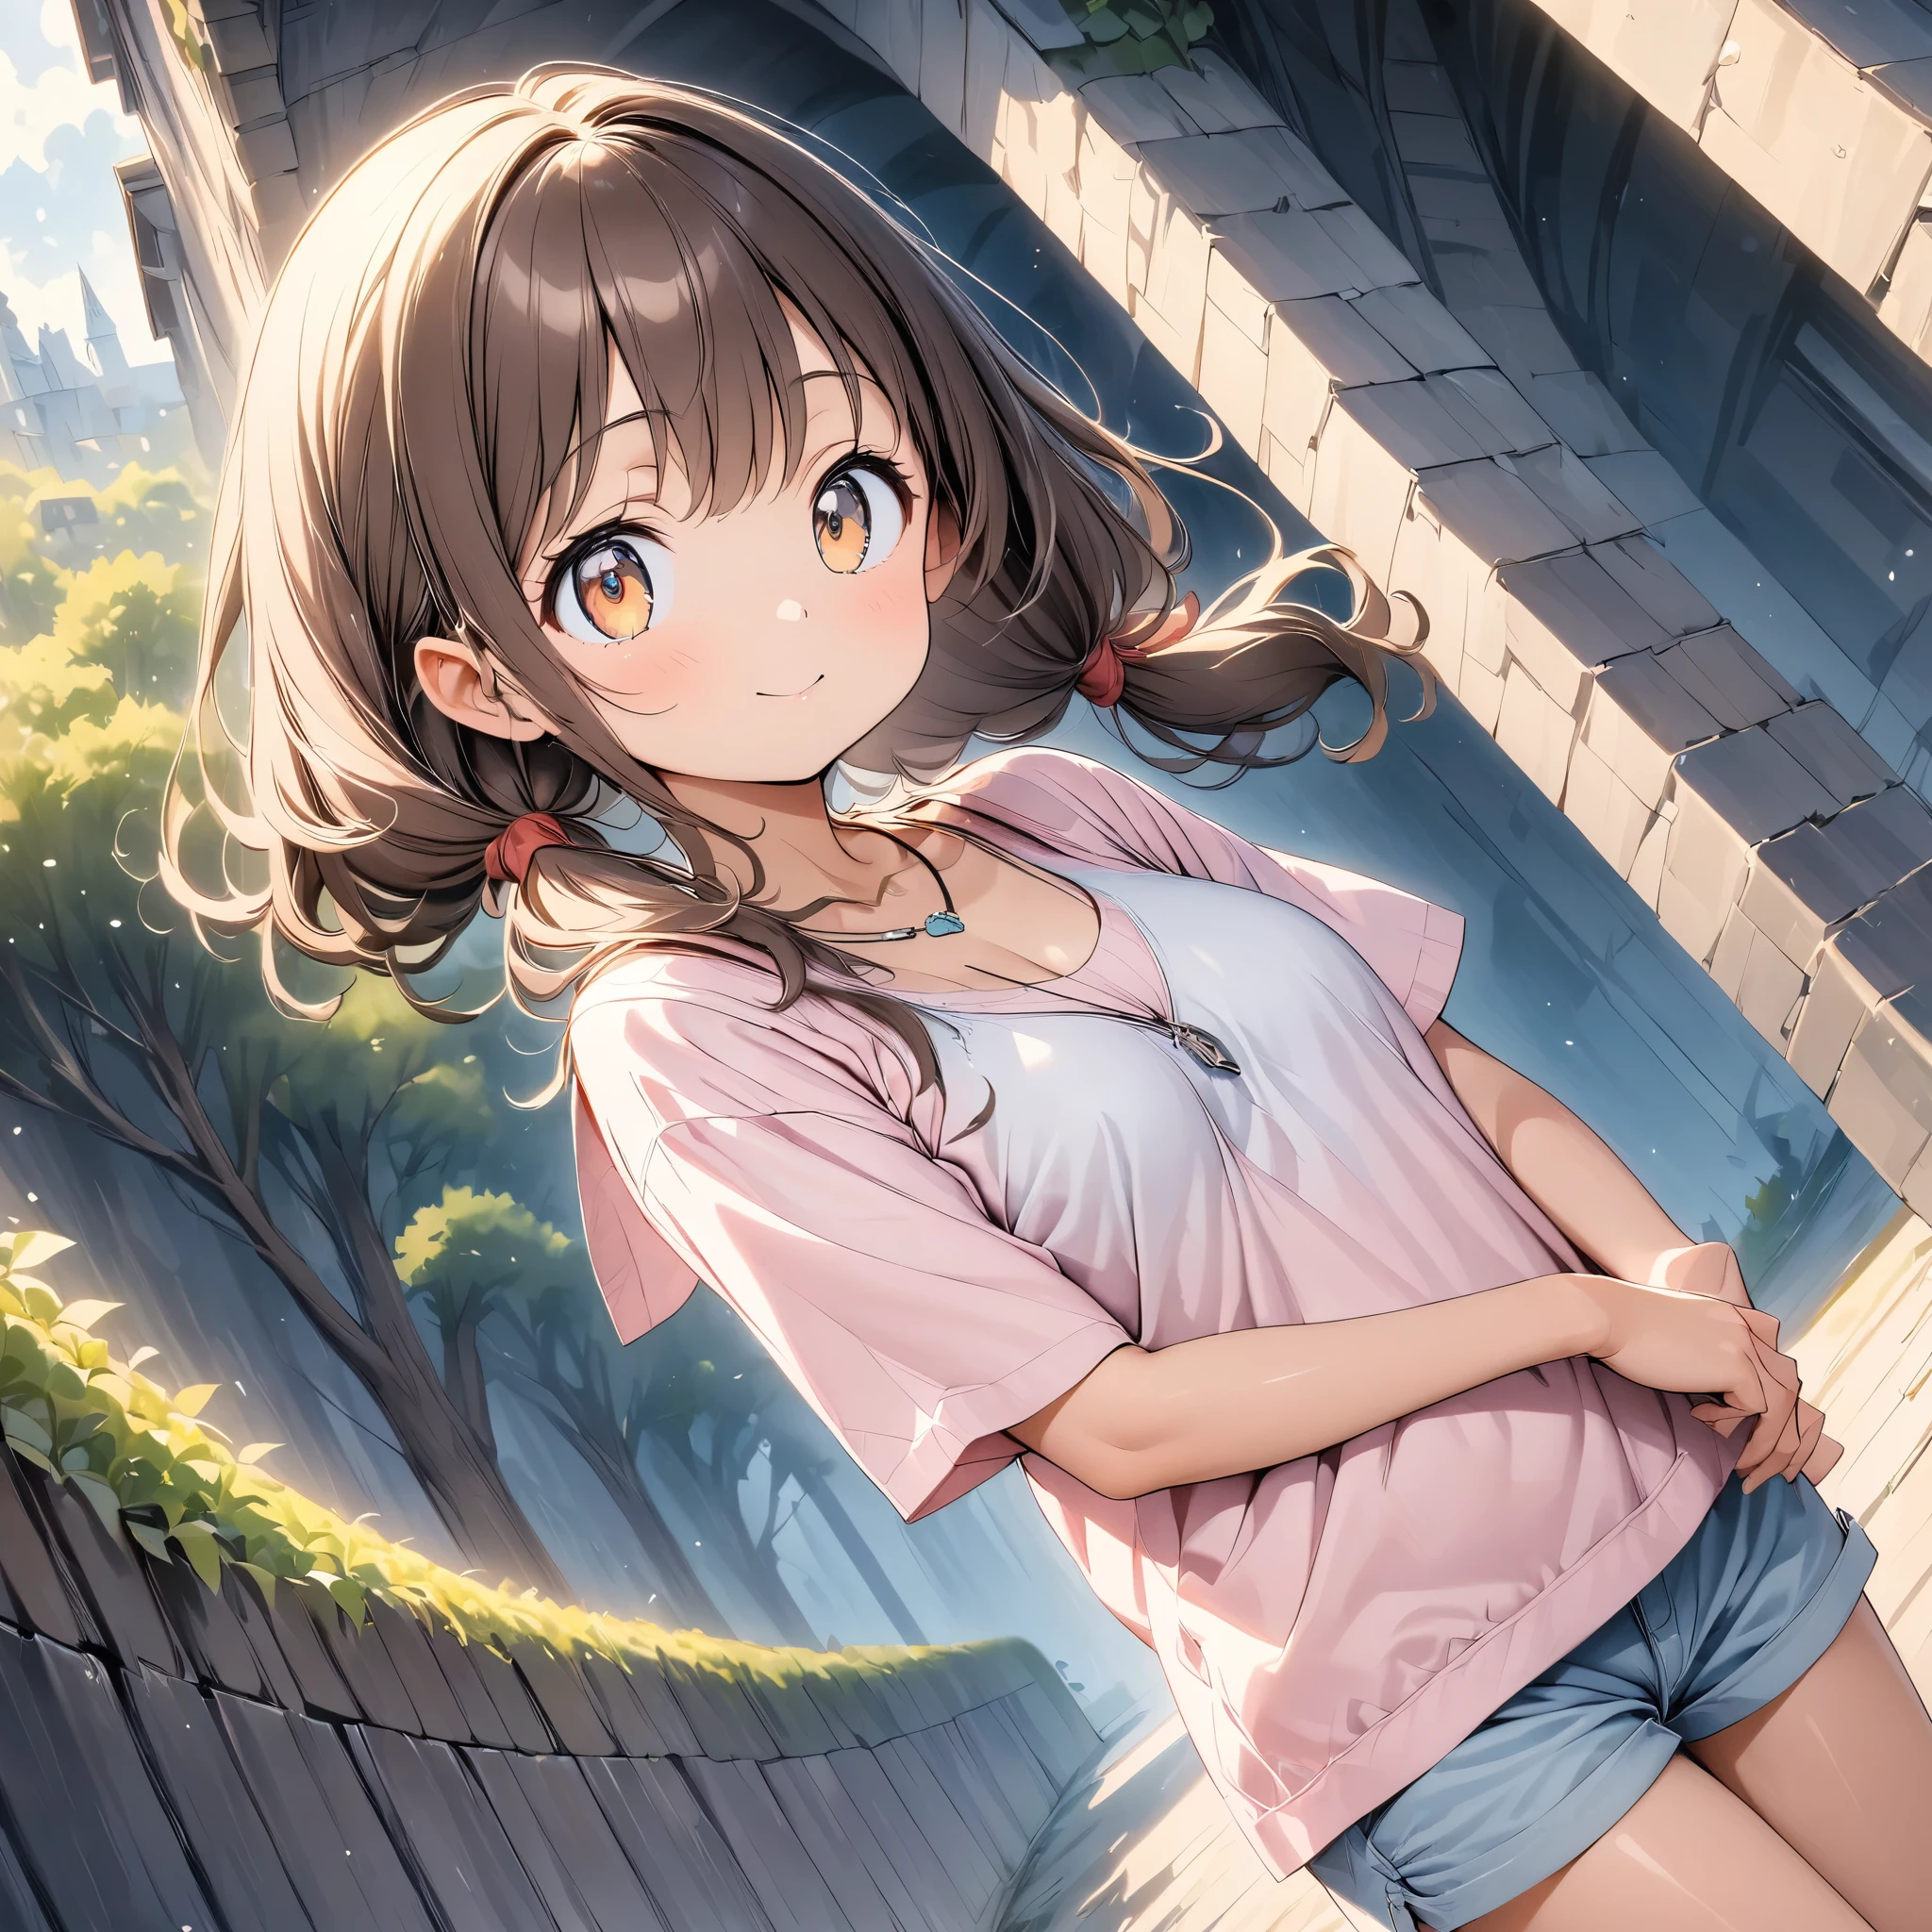 (Pastel color:1.3), (child:0.9), beautiful illustration, (perfect lighting, natural lighting), beautiful detailed hair, beautiful detailed face, beautiful detailed eyes, beautiful clavicle, beautiful body, beautiful chest, beautiful thigh, beautiful legs, beautiful hands, cute and symmetrical face, shiny skin, (detailed cloth texture:1.2), (beautiful scenery), (upper eyes), (dimple:1.5), (ultra illustrated style:1.3), (ultra detailed pantie:1.5), (beautiful faces detailed, real human skin:1.2), 
(black hoodies:1.5), (short pants:2.0),
(1 girl:1.4), (9 years old, height 1.2meters, chubby 28kg, tareme:1.3), (orange eyes with a hint of pink:1.3), (dark brown hair:1.7), (straight hair:1.7), (low twintails:1.7), (red hair tie:1.7), (large and soft breasts, Slender body, Small Ass:1.7), small nipples, fair skin, (necklace), (Droopy eyes:1.2), 
(dynamic angle, sexypose:1.4), side view, (from bellow:1.8), full body, 
elicate details, depth of field, best quality, anatomically correct, high details, HD, 8k,
